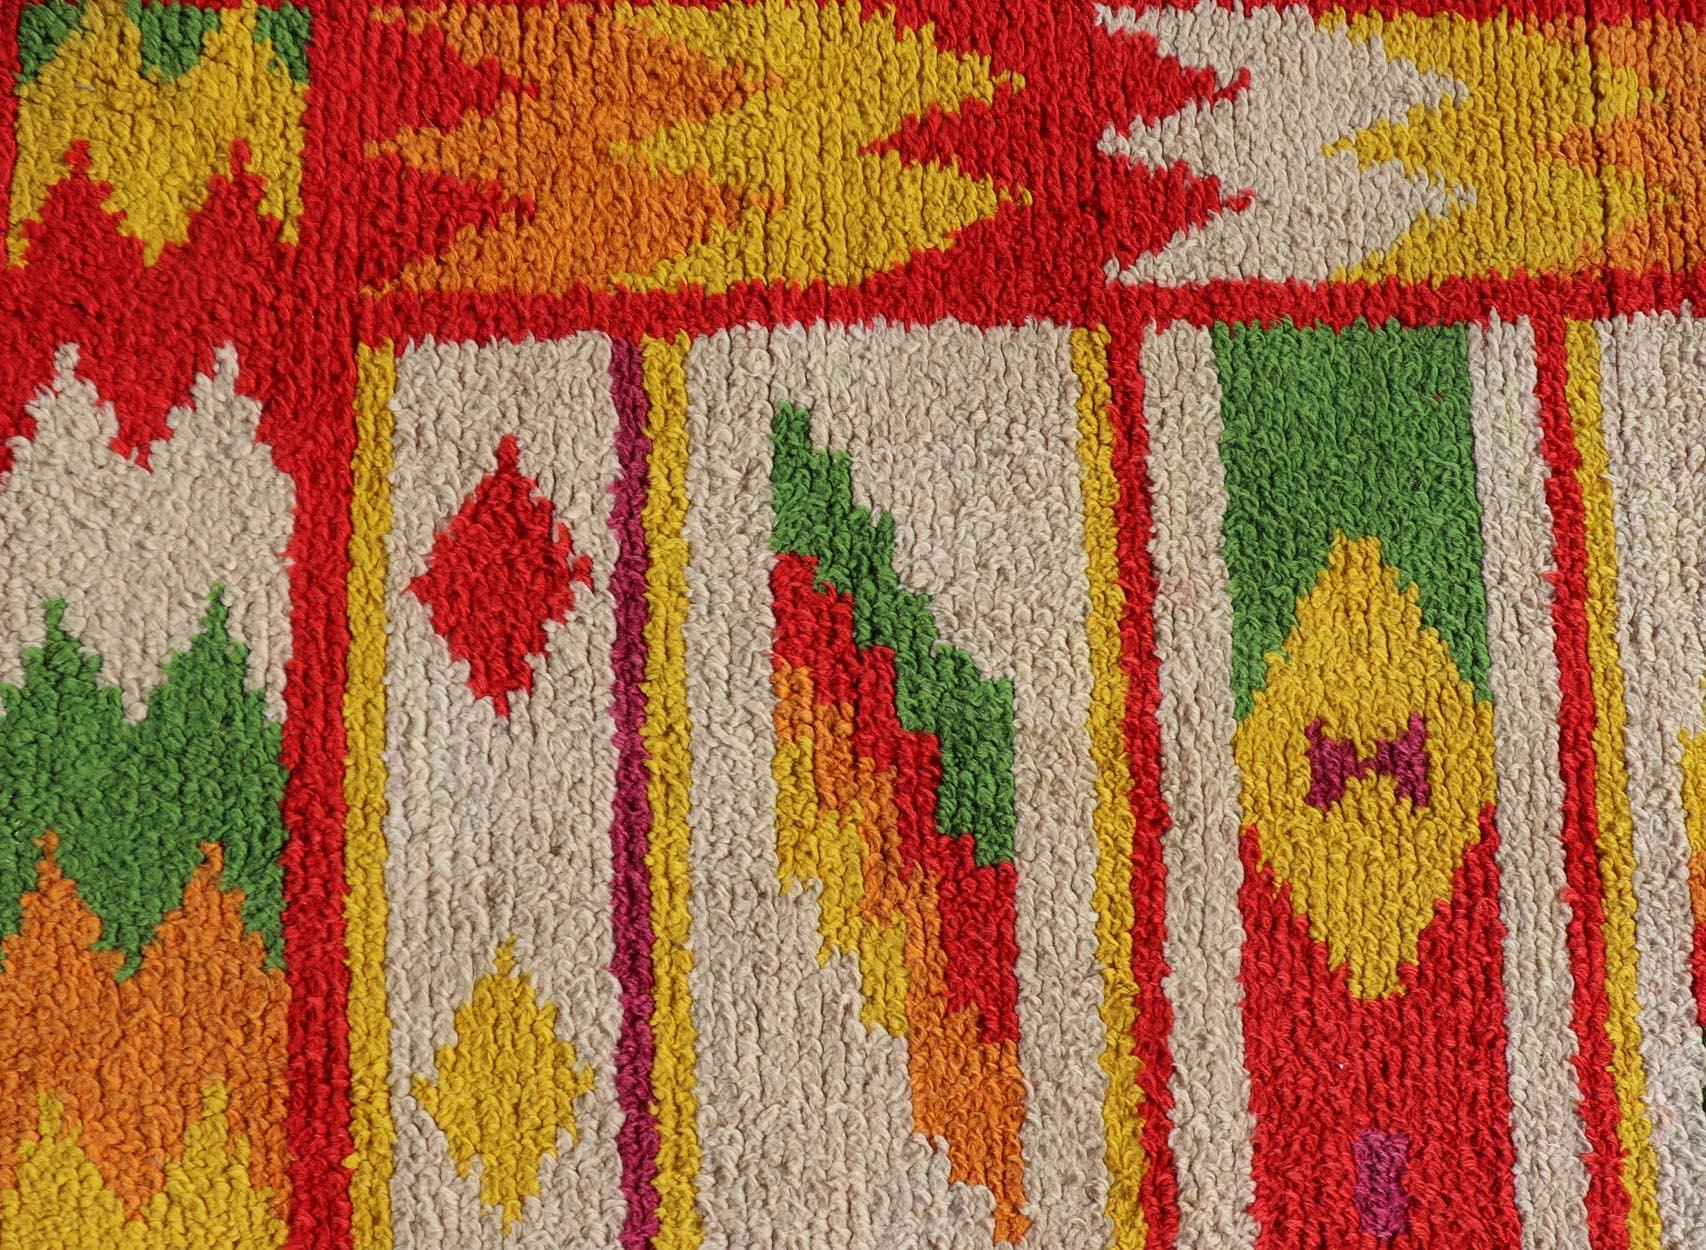 Wool Vintage Moroccan Rug with All-Over Tribal Motif Design In Red, Green & Yellow For Sale